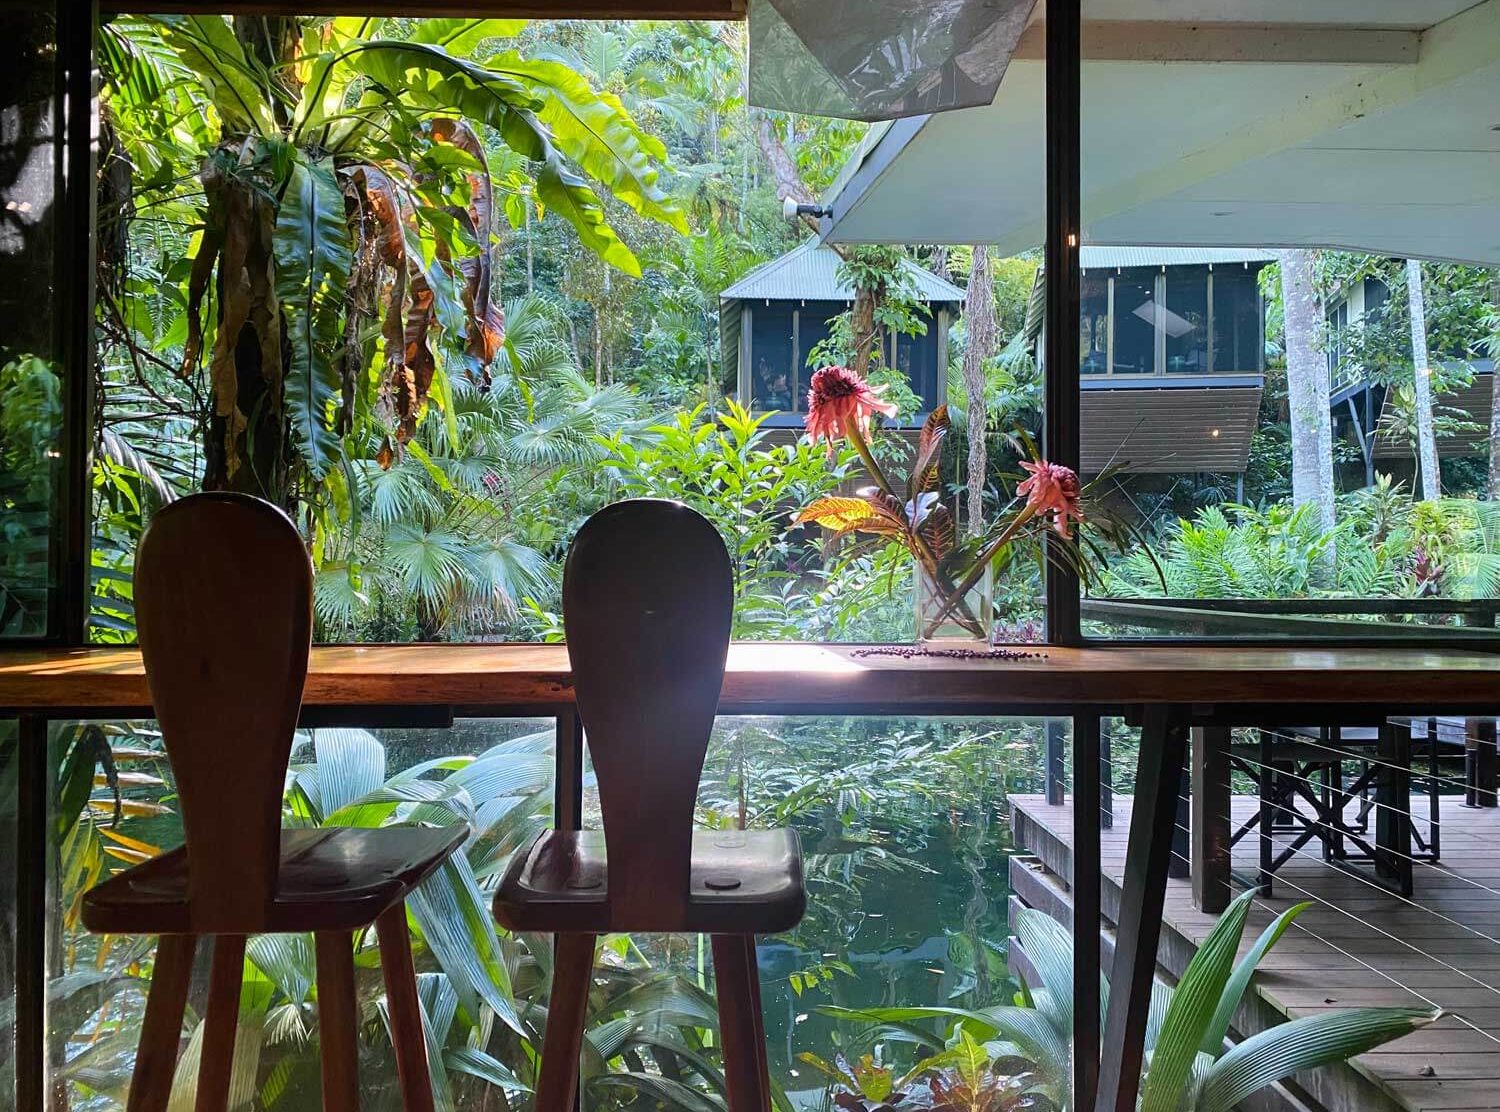 Daintree Ecolodge They provide stainless steel water bottles and ceramic keep cups as an environmentally friendly alternative for plastic water ¬bottles and takeaway cups, and they support the anti-straw movement to help clean up our oceans. Paper straws are available upon request